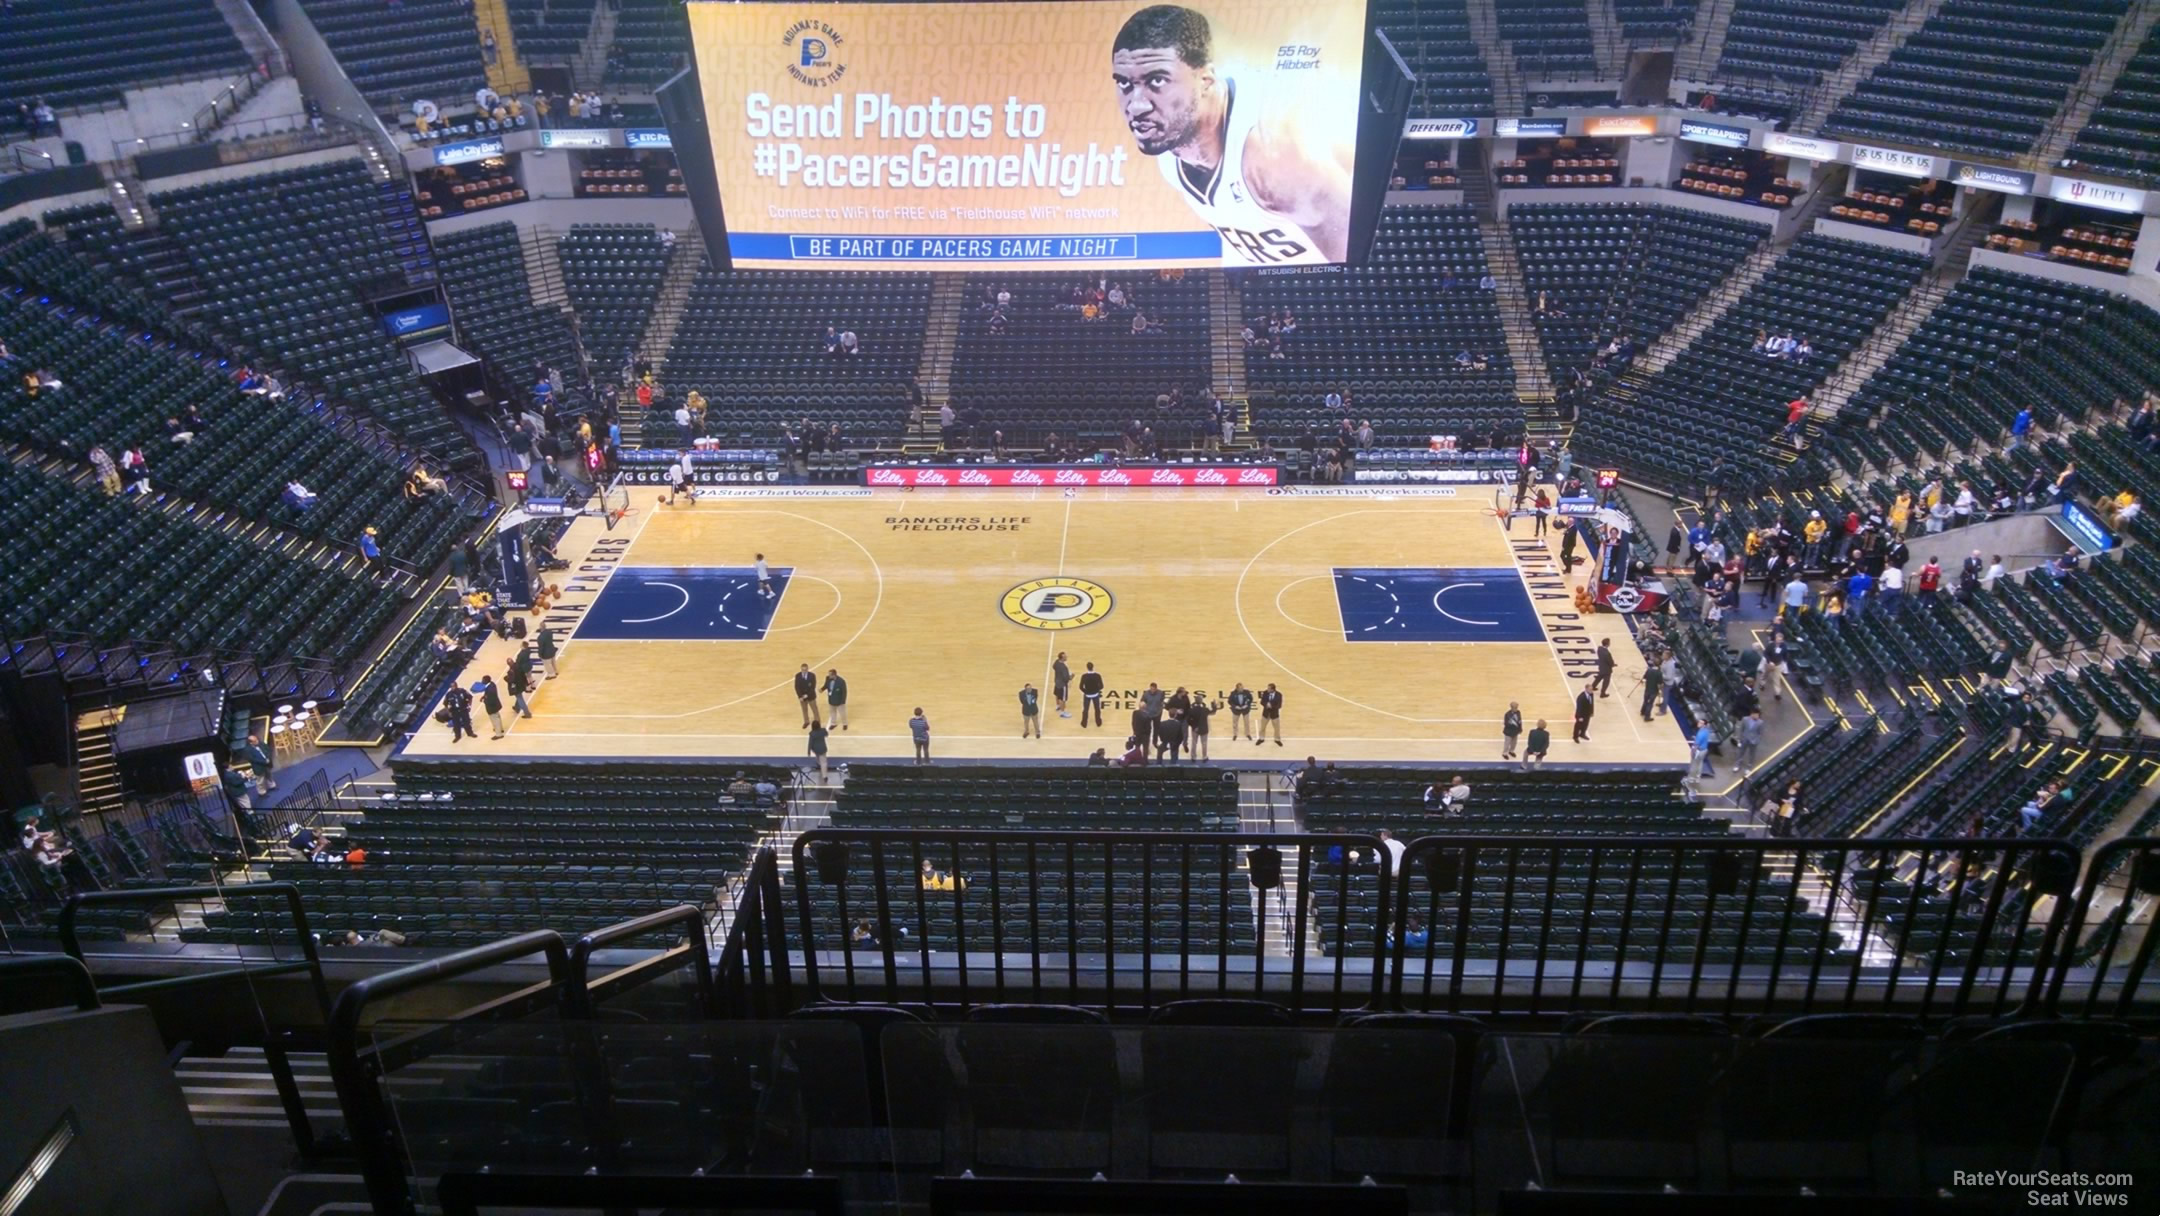 Bankers Life Fieldhouse Handicap Seating Chart